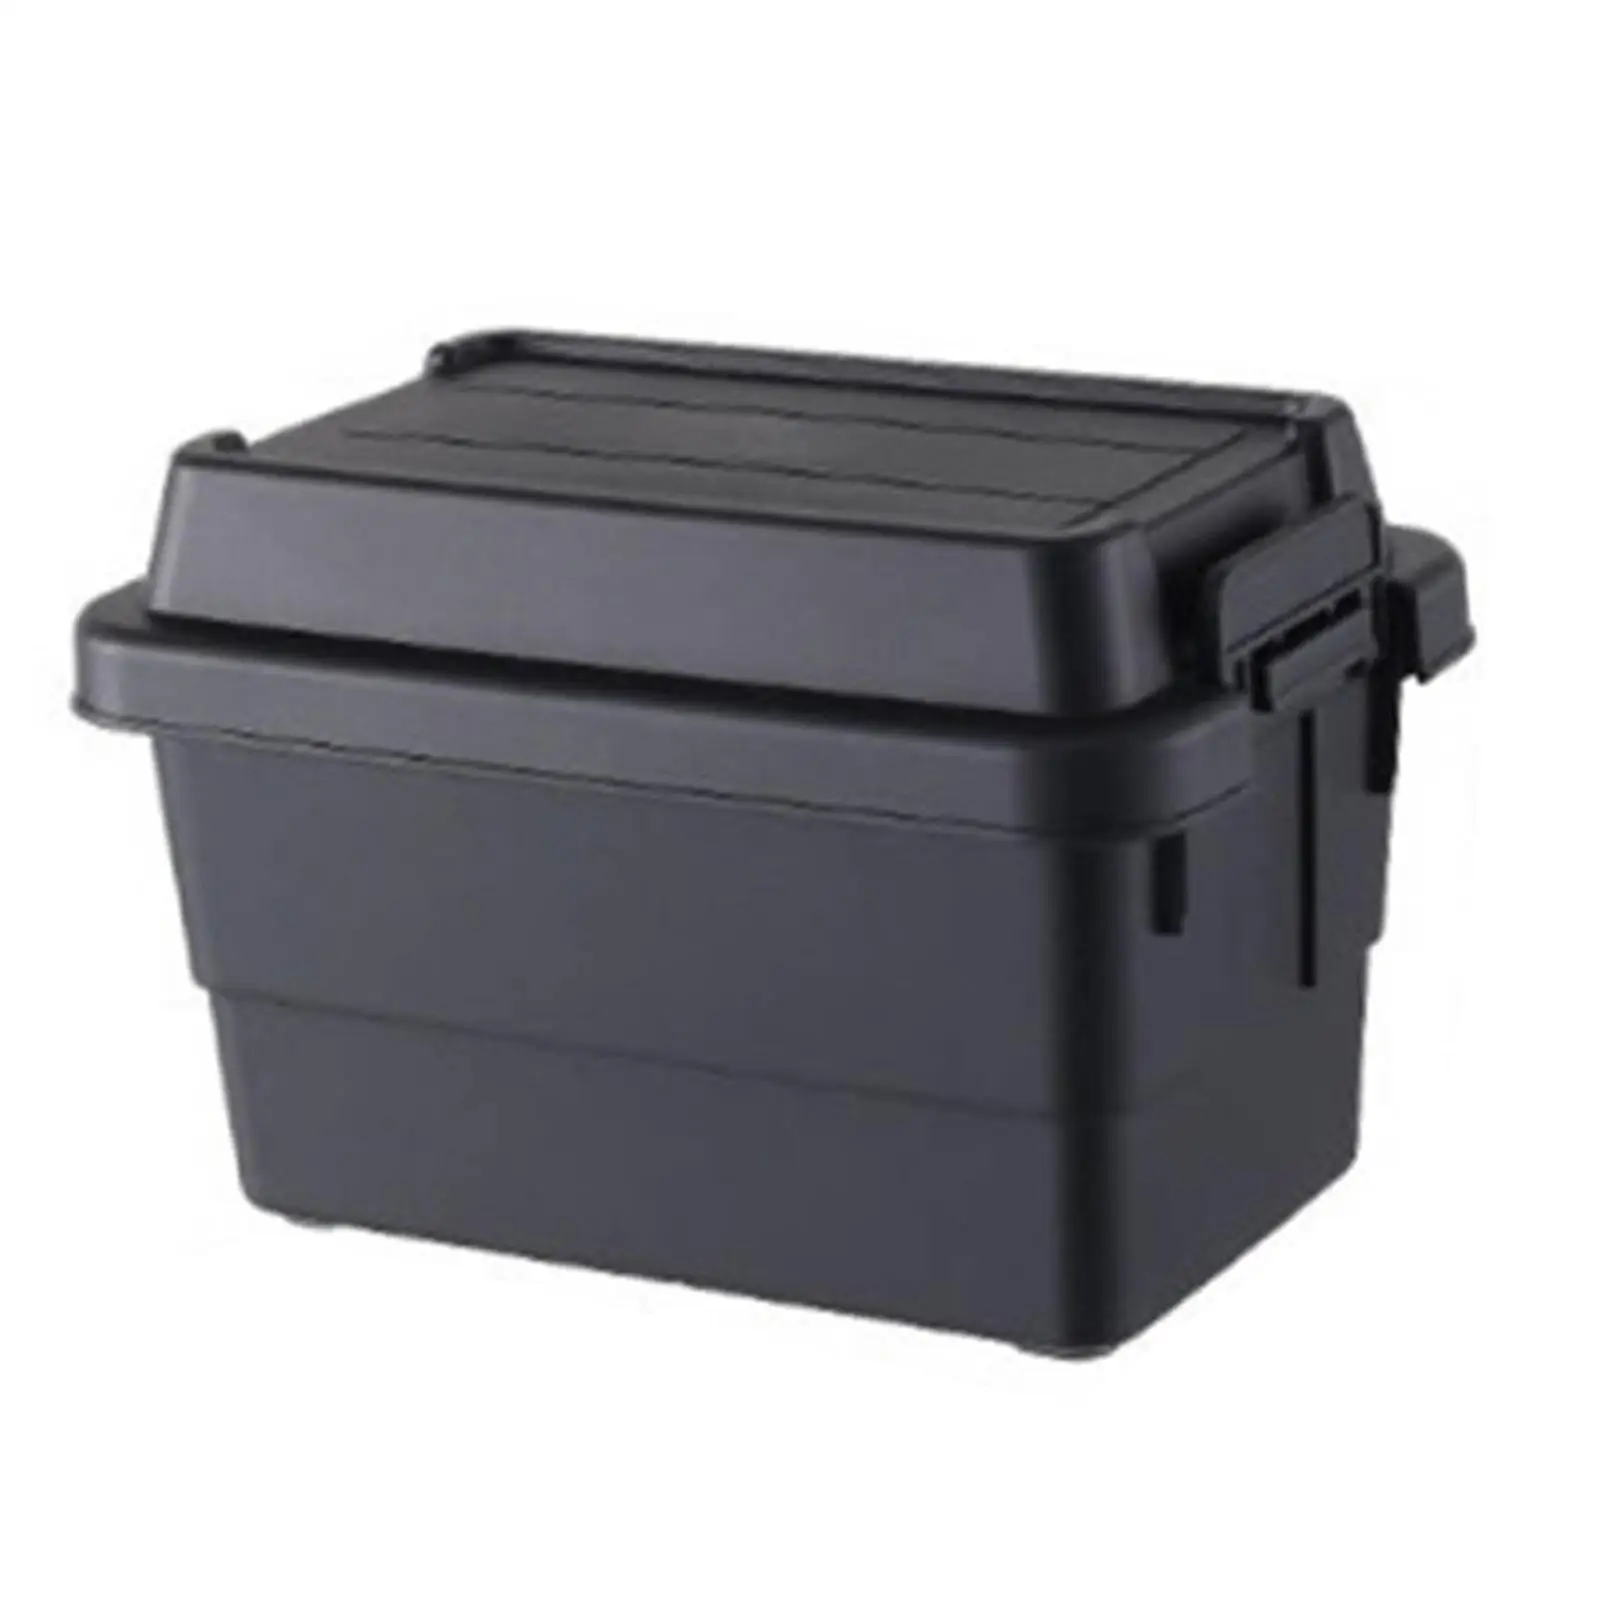 Camping Storage Box Waterproof Portable Storage Bin with Lid for Barbecue Cooking Fishing